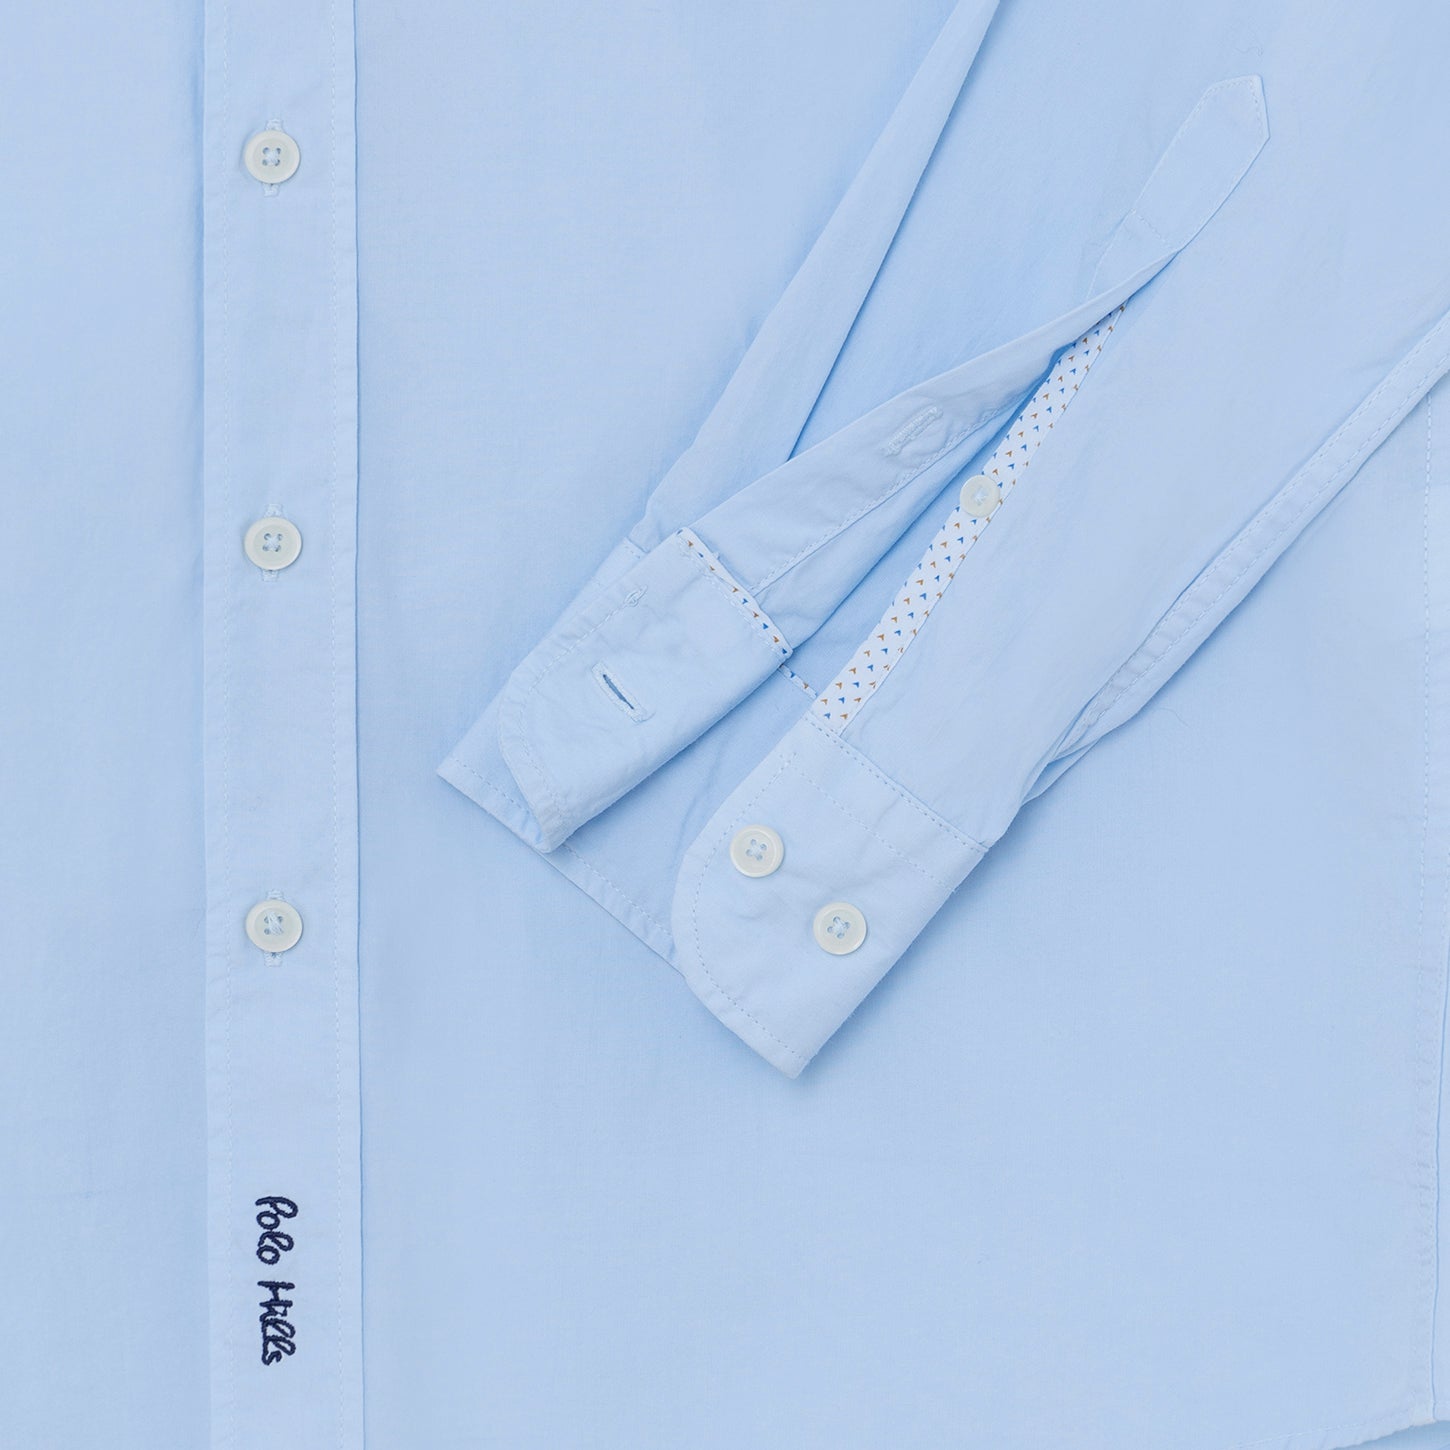 CAMISA PAP SKY - Polo Hills